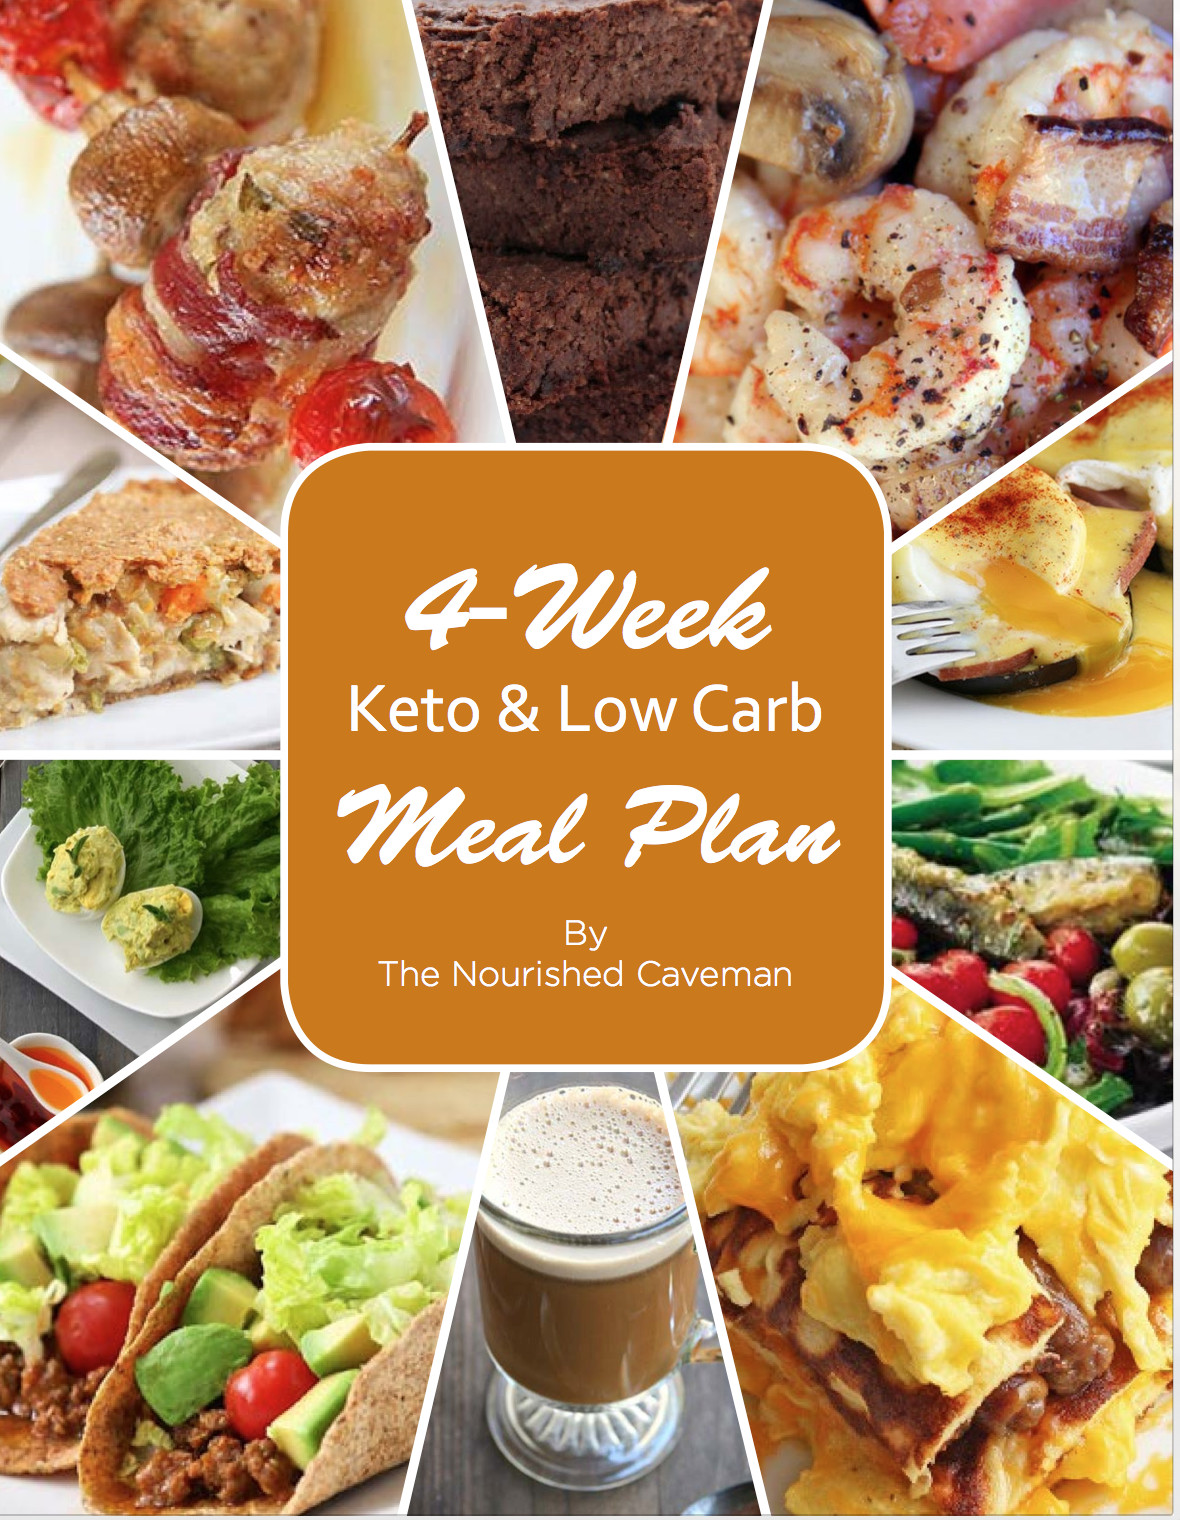 Low Carb Keto Dinner
 4 Week Keto & Low Carb Meal Plan The Nourished Caveman